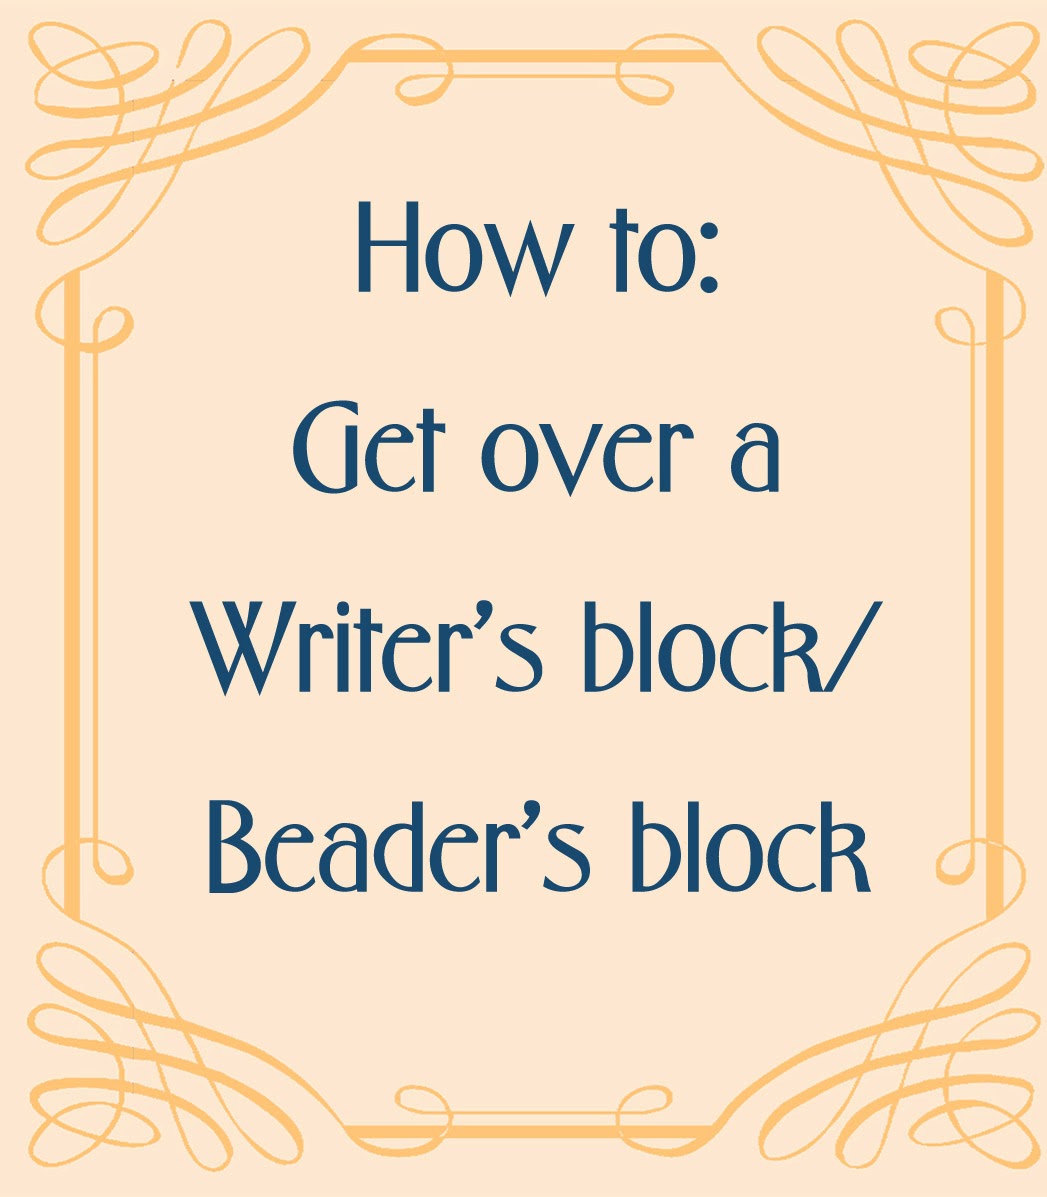 Getting over a writer's block